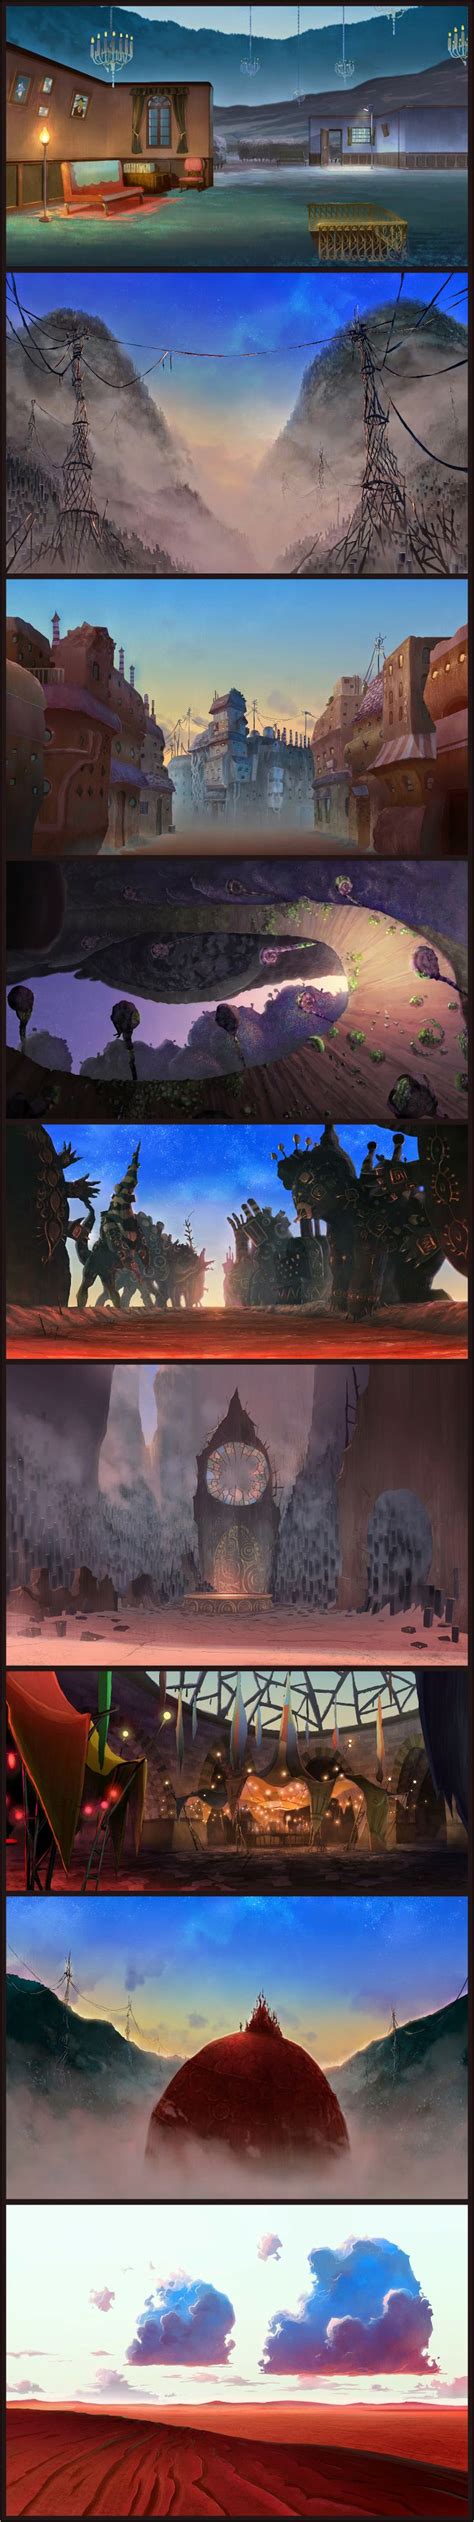 Background Art For Space Dandy Ep 21 By Santiago Montiel Anime